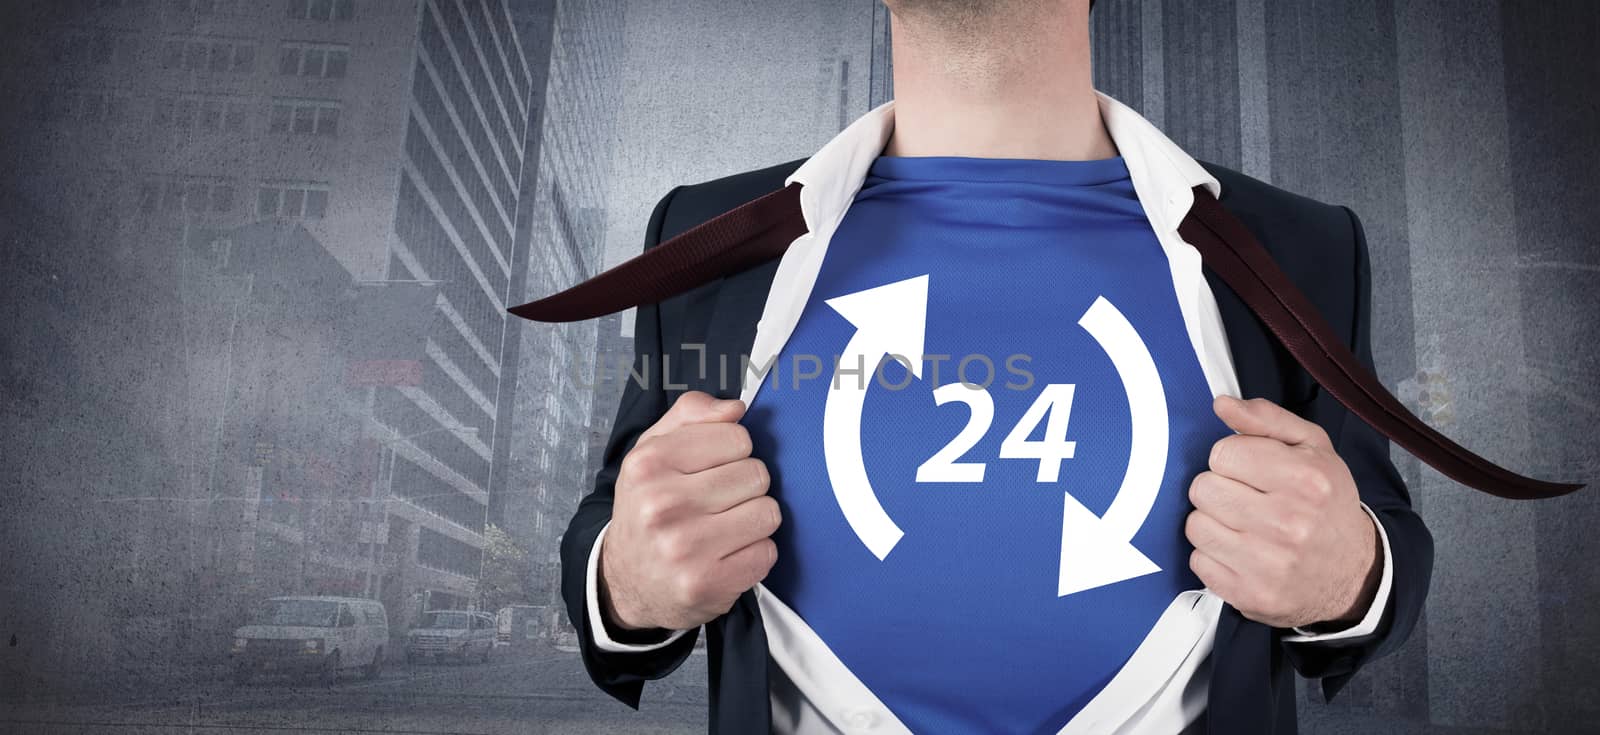 Businessman opening his shirt superhero style against urban projection on wall